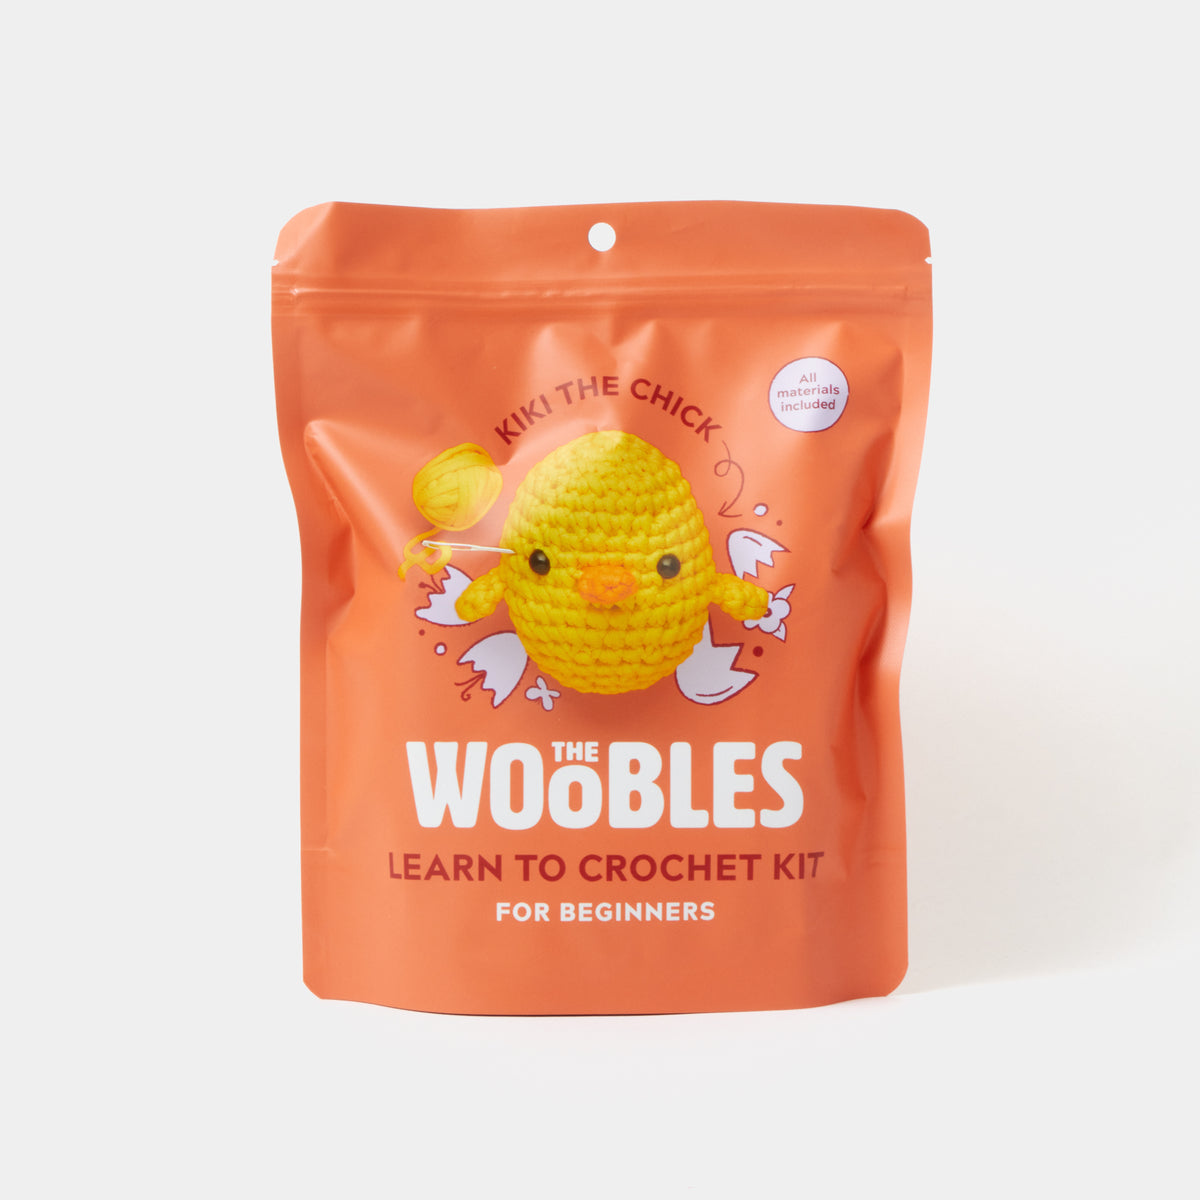 Pierre the Penguin: The Woobles Learn to Crochet Kit